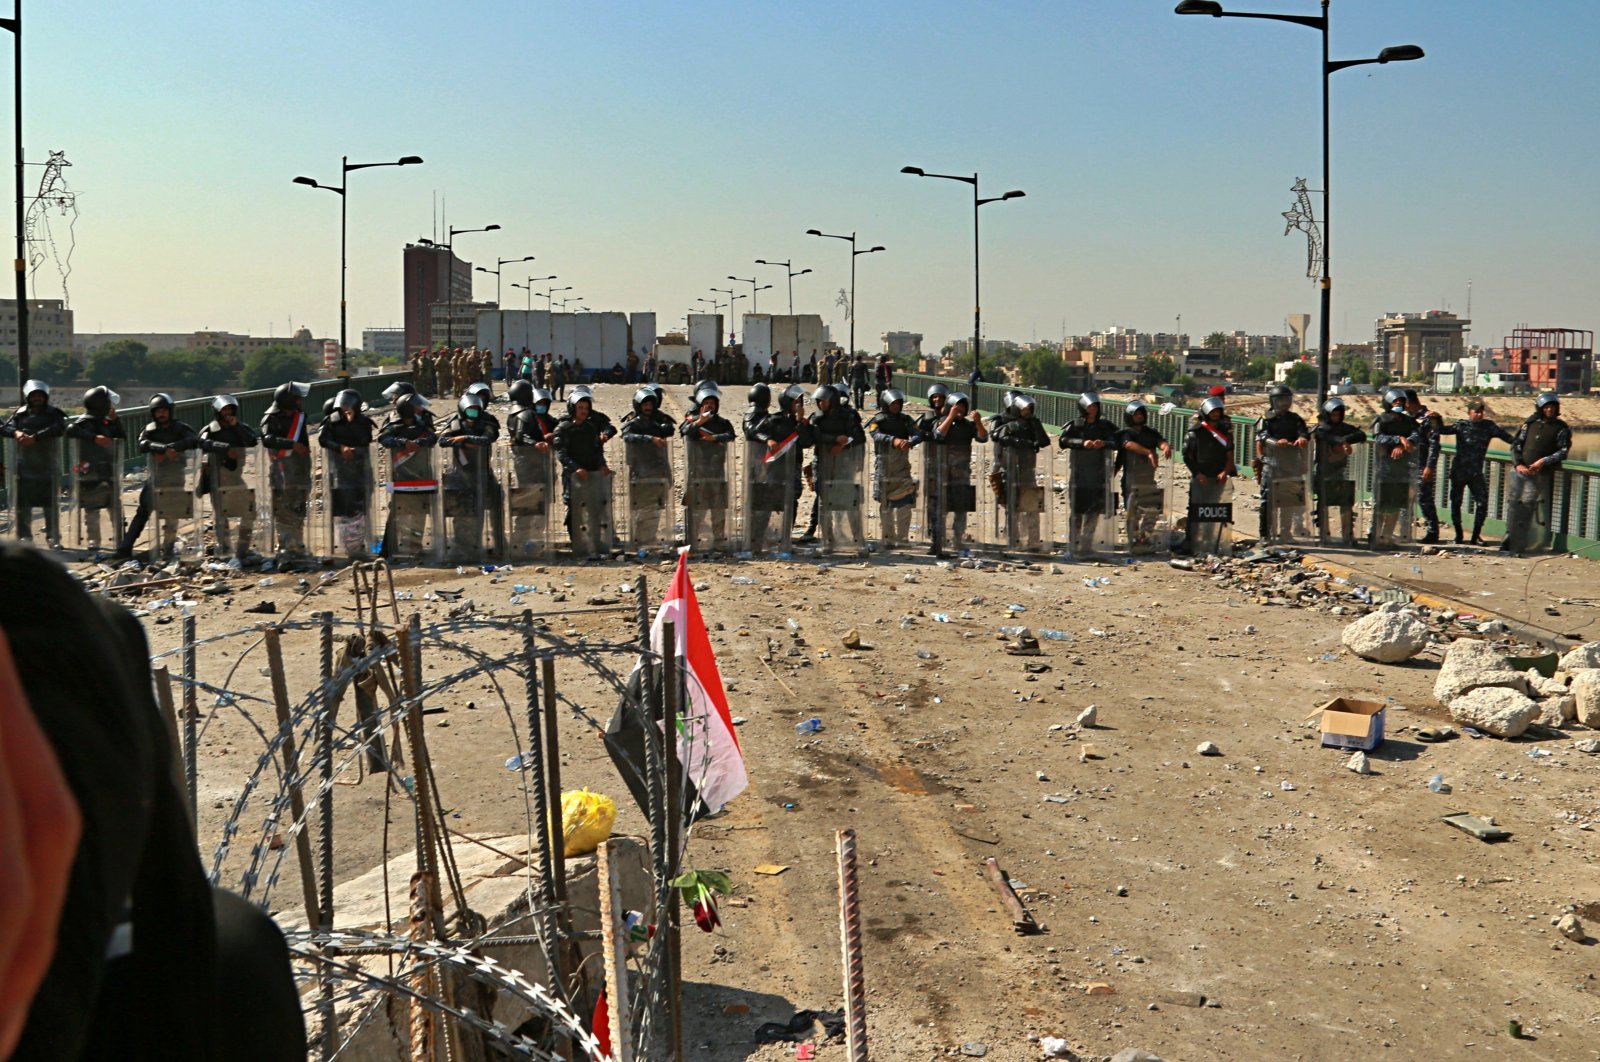 Security forces close the bridge leading to the Green Zone during a demonstration in Baghdad, Iraq, Oct. 26, 2019. (AP Photo)